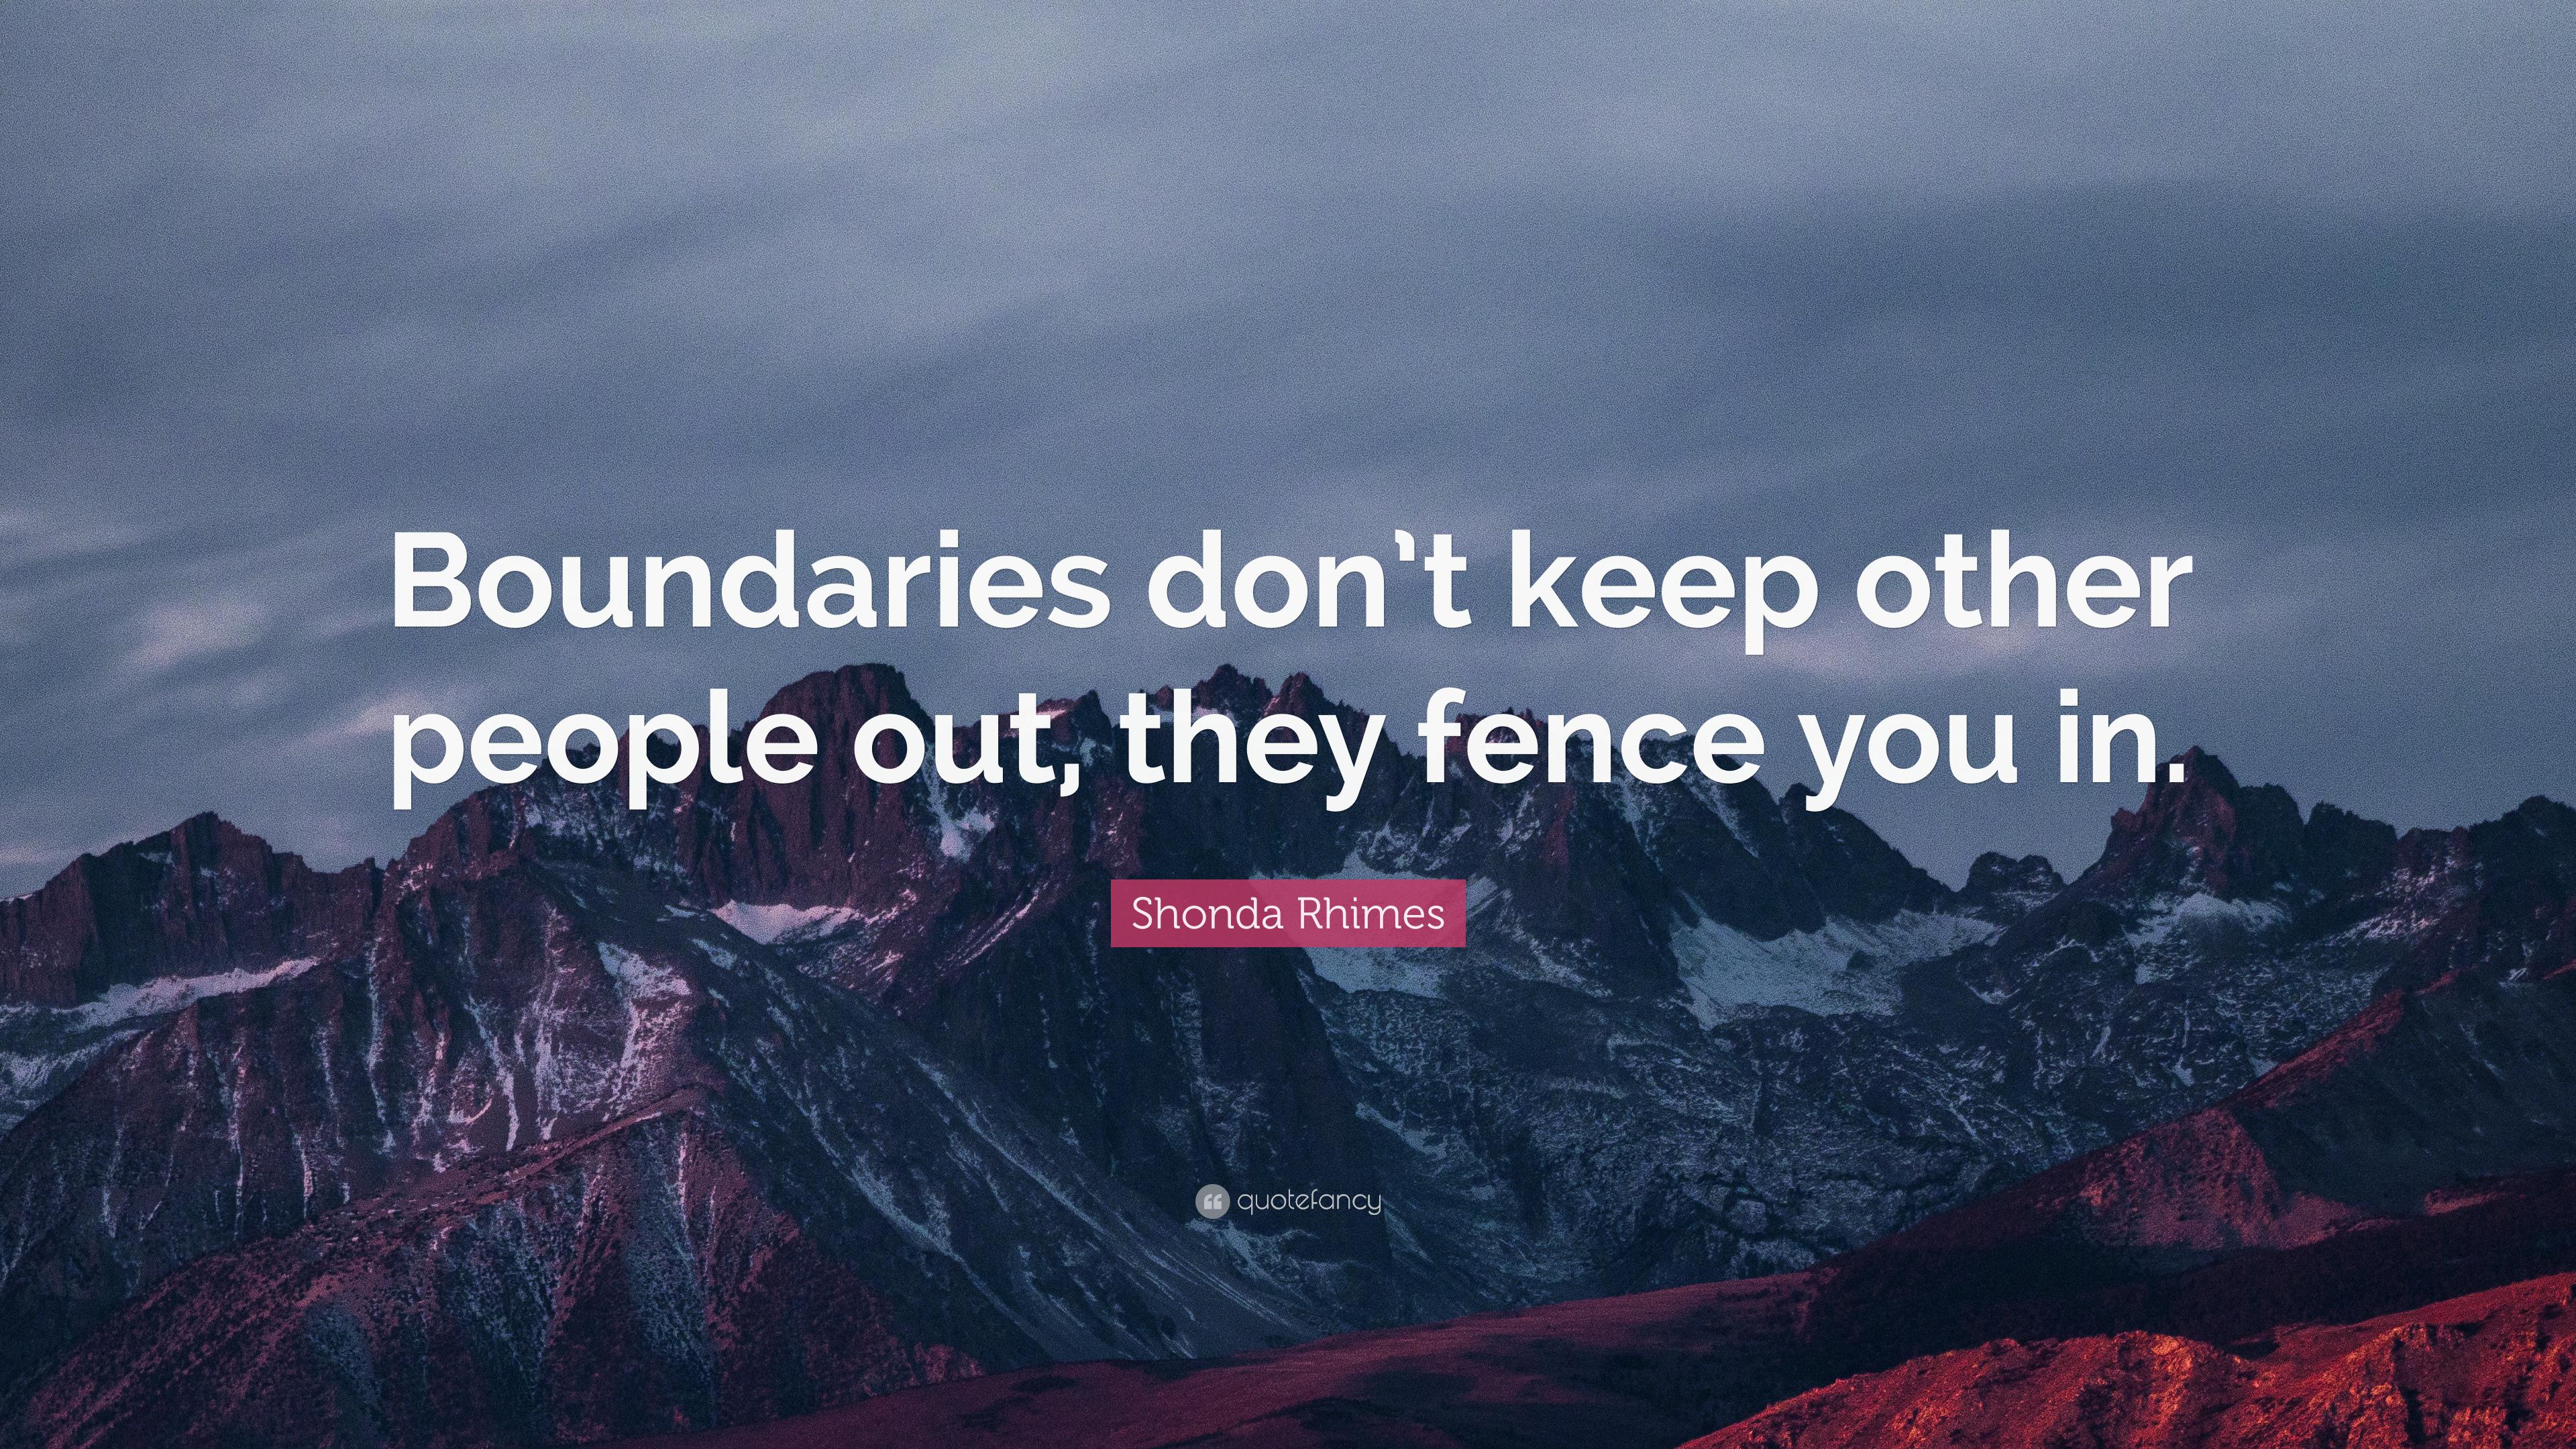 Shonda Rhimes Quote: “Boundaries don't keep other people out, they